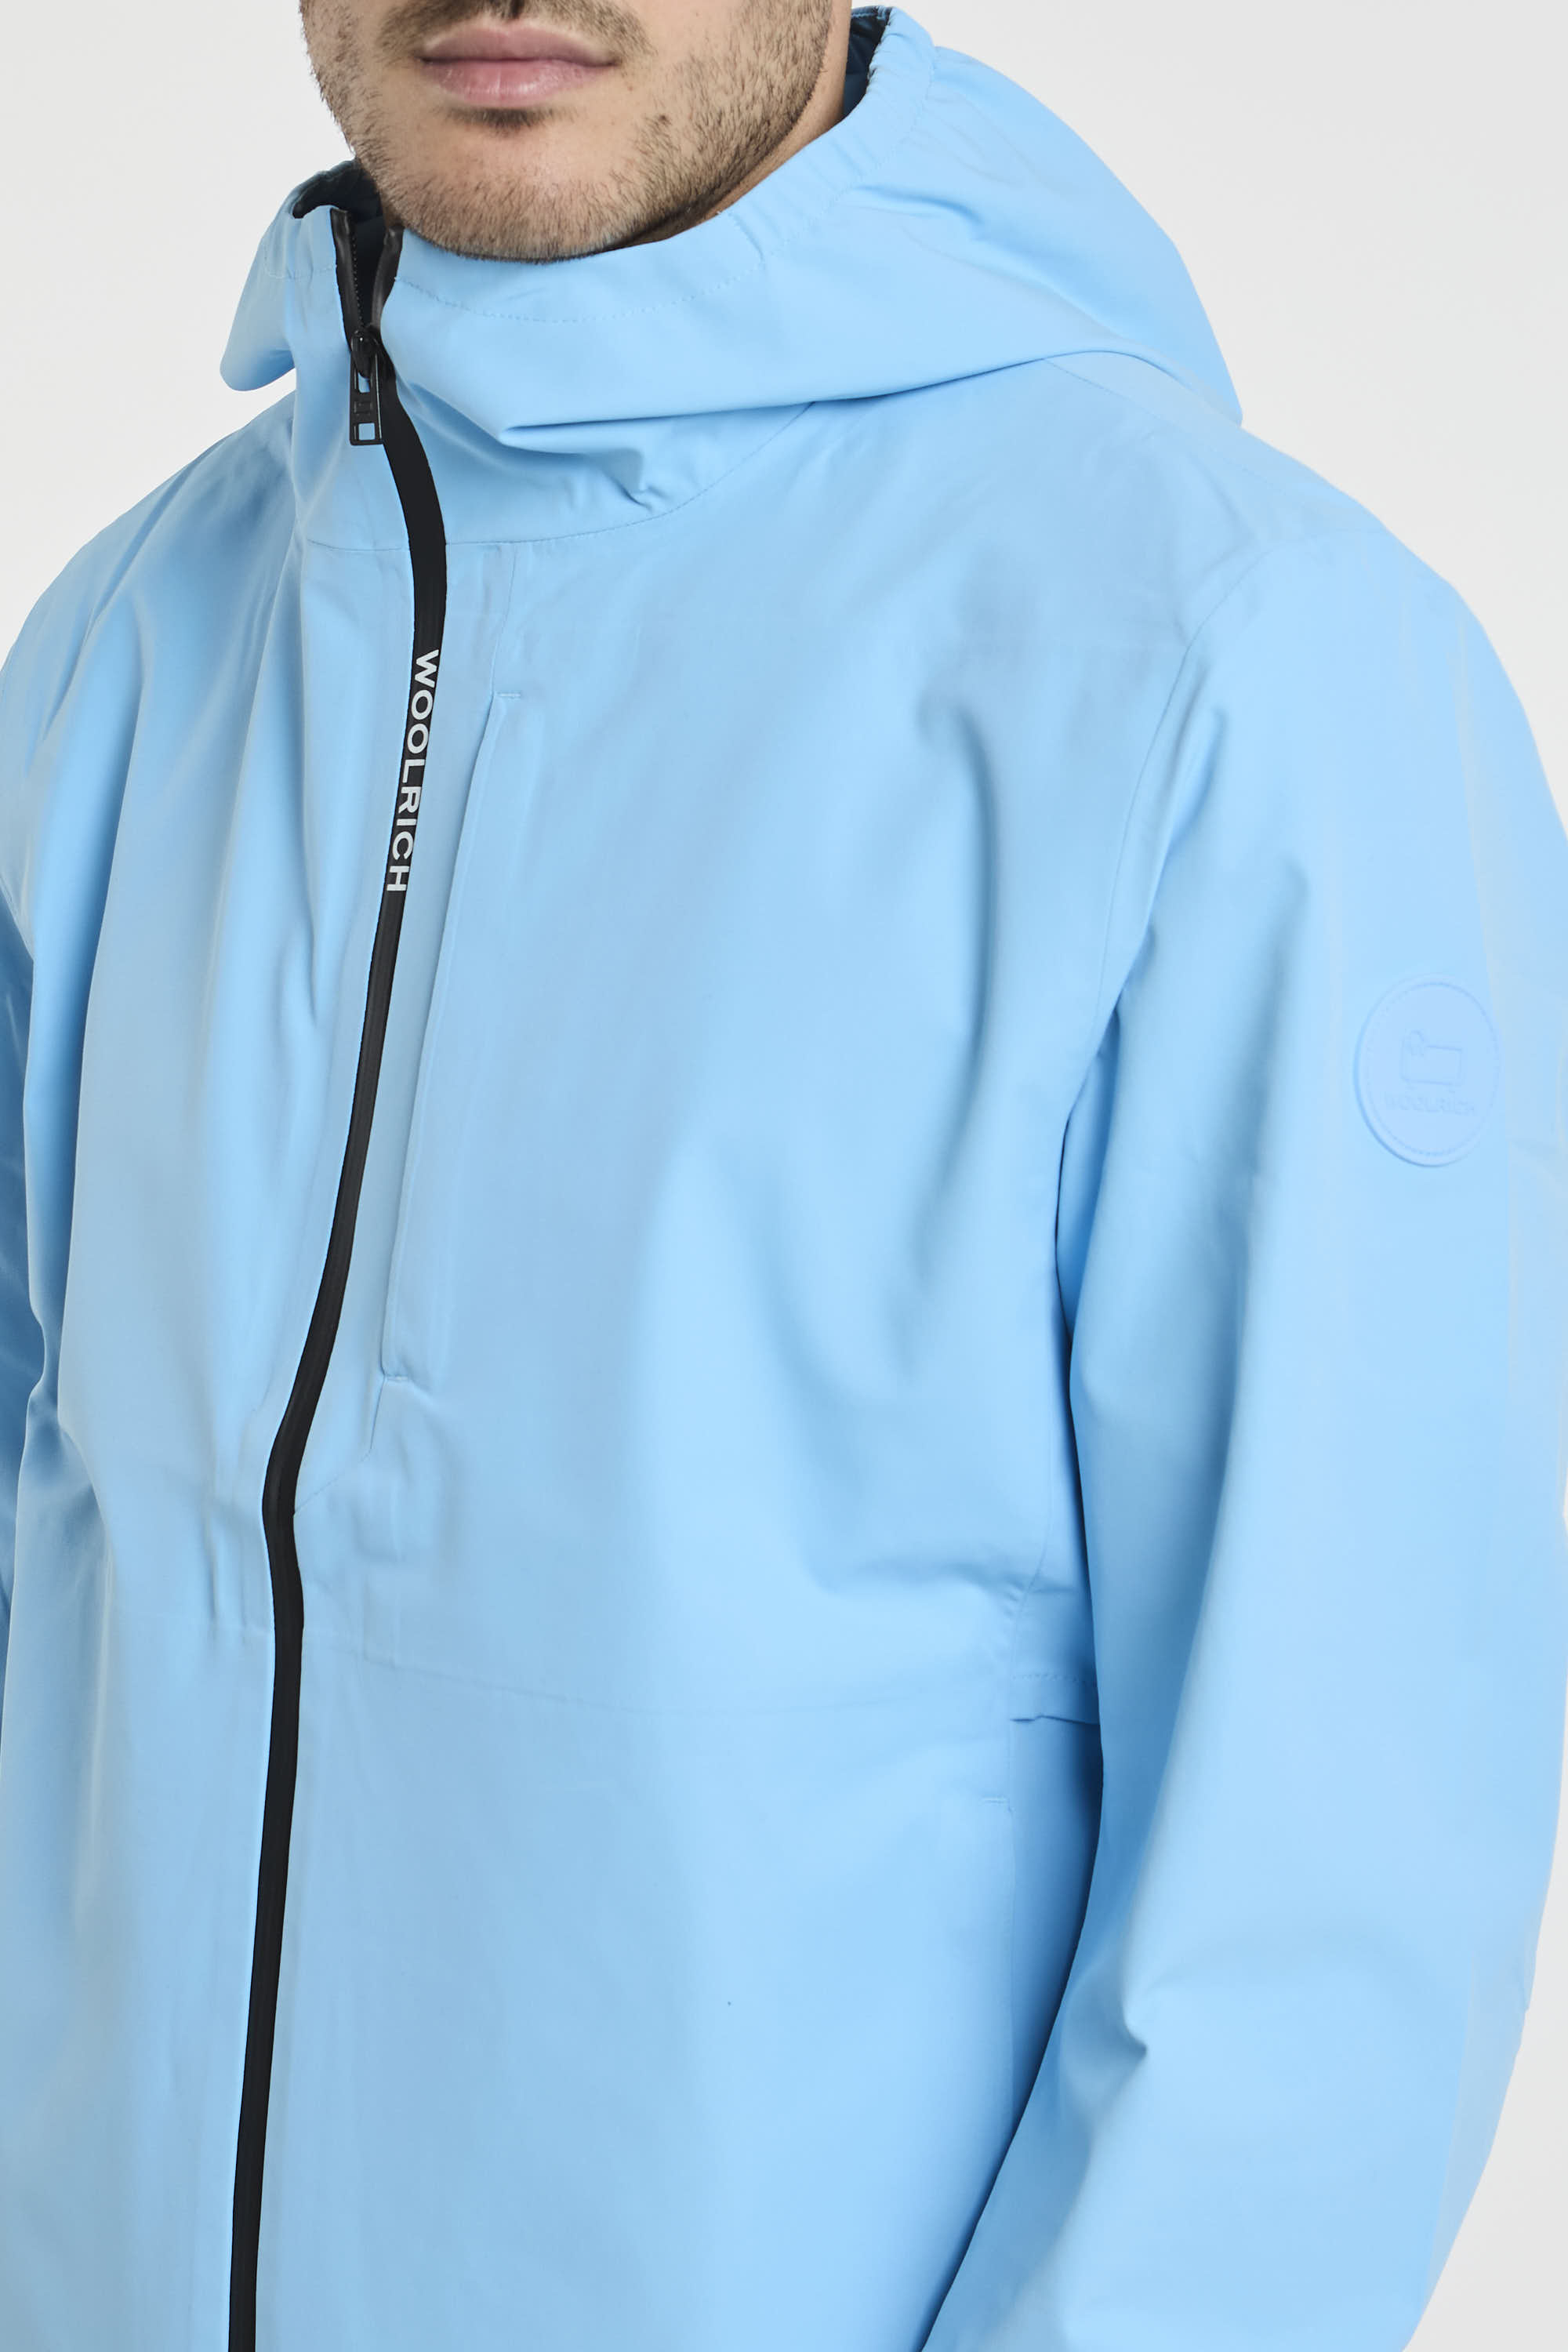 Woolrich Waterproof Polyester Pacific Jacket with Hood in Blue-3